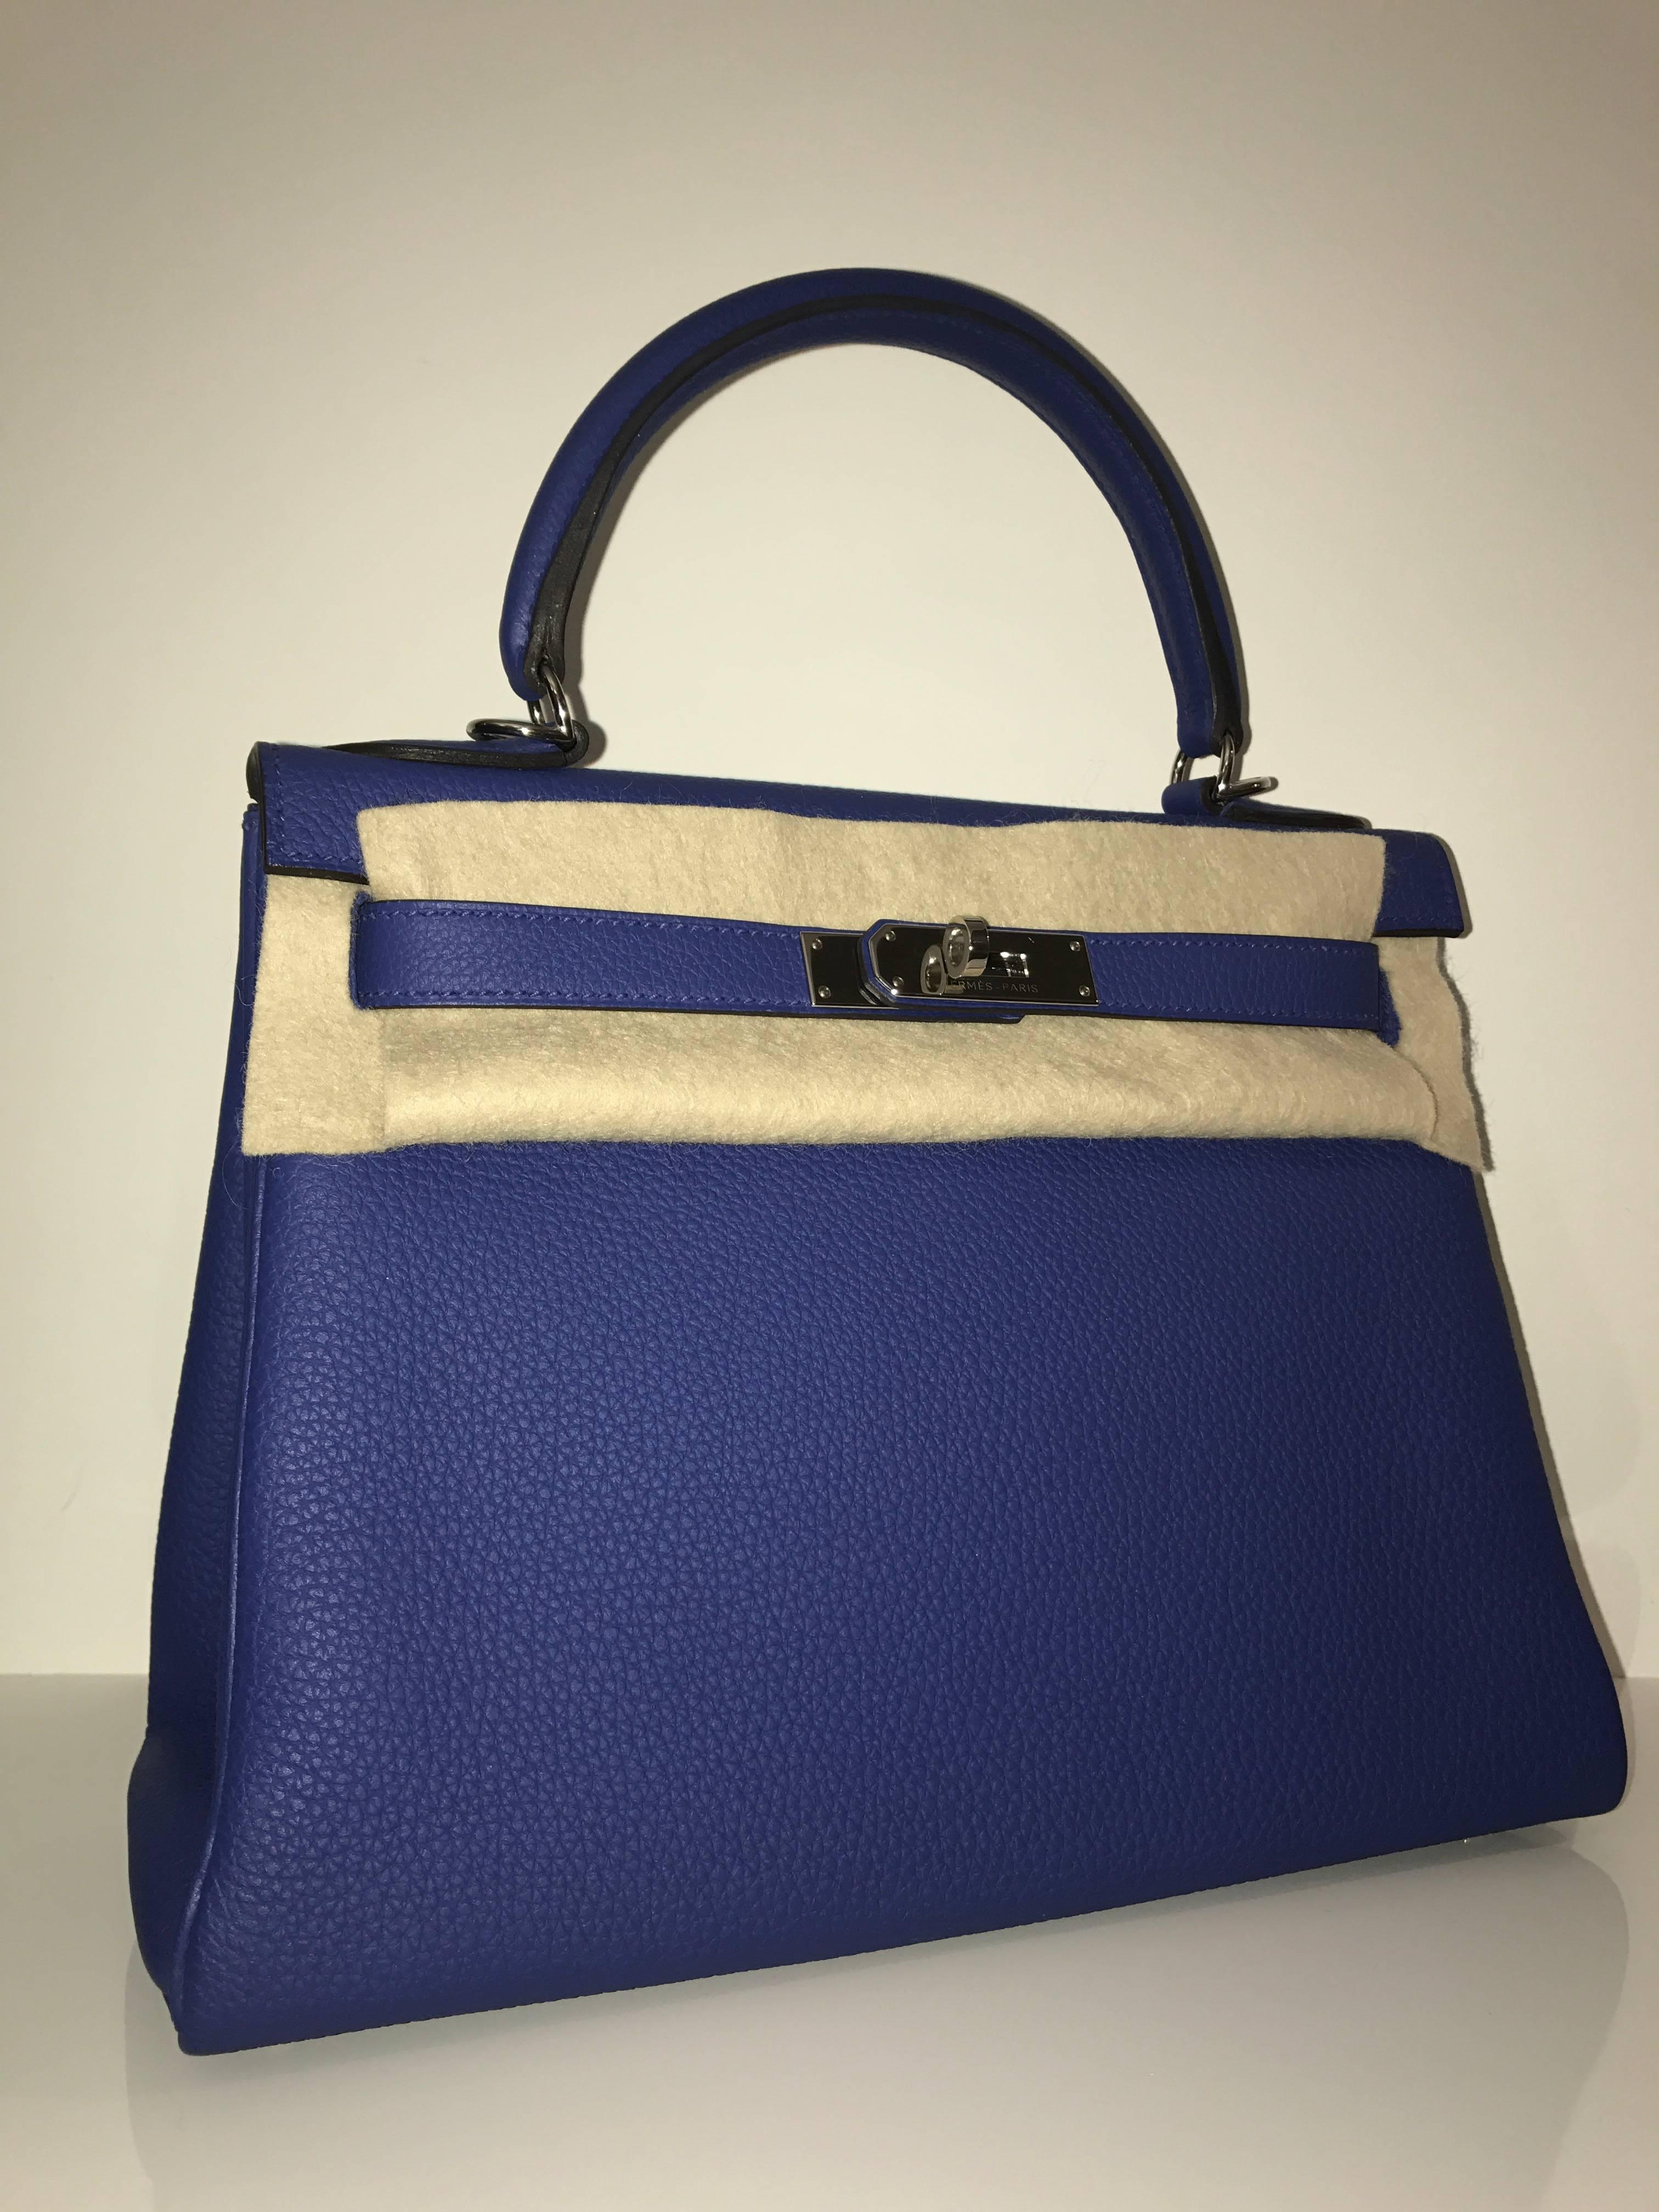 Hermes 
Kelly Size 28
Togo Leather 
Colour Electric Blue  
Silver Hardware
Store fresh, comes with receipt and full set (dust bag, box...) 
Hydeparkfashion specializes in sourcing and delivering authentic luxury handbags, mainly Hermes, to clients